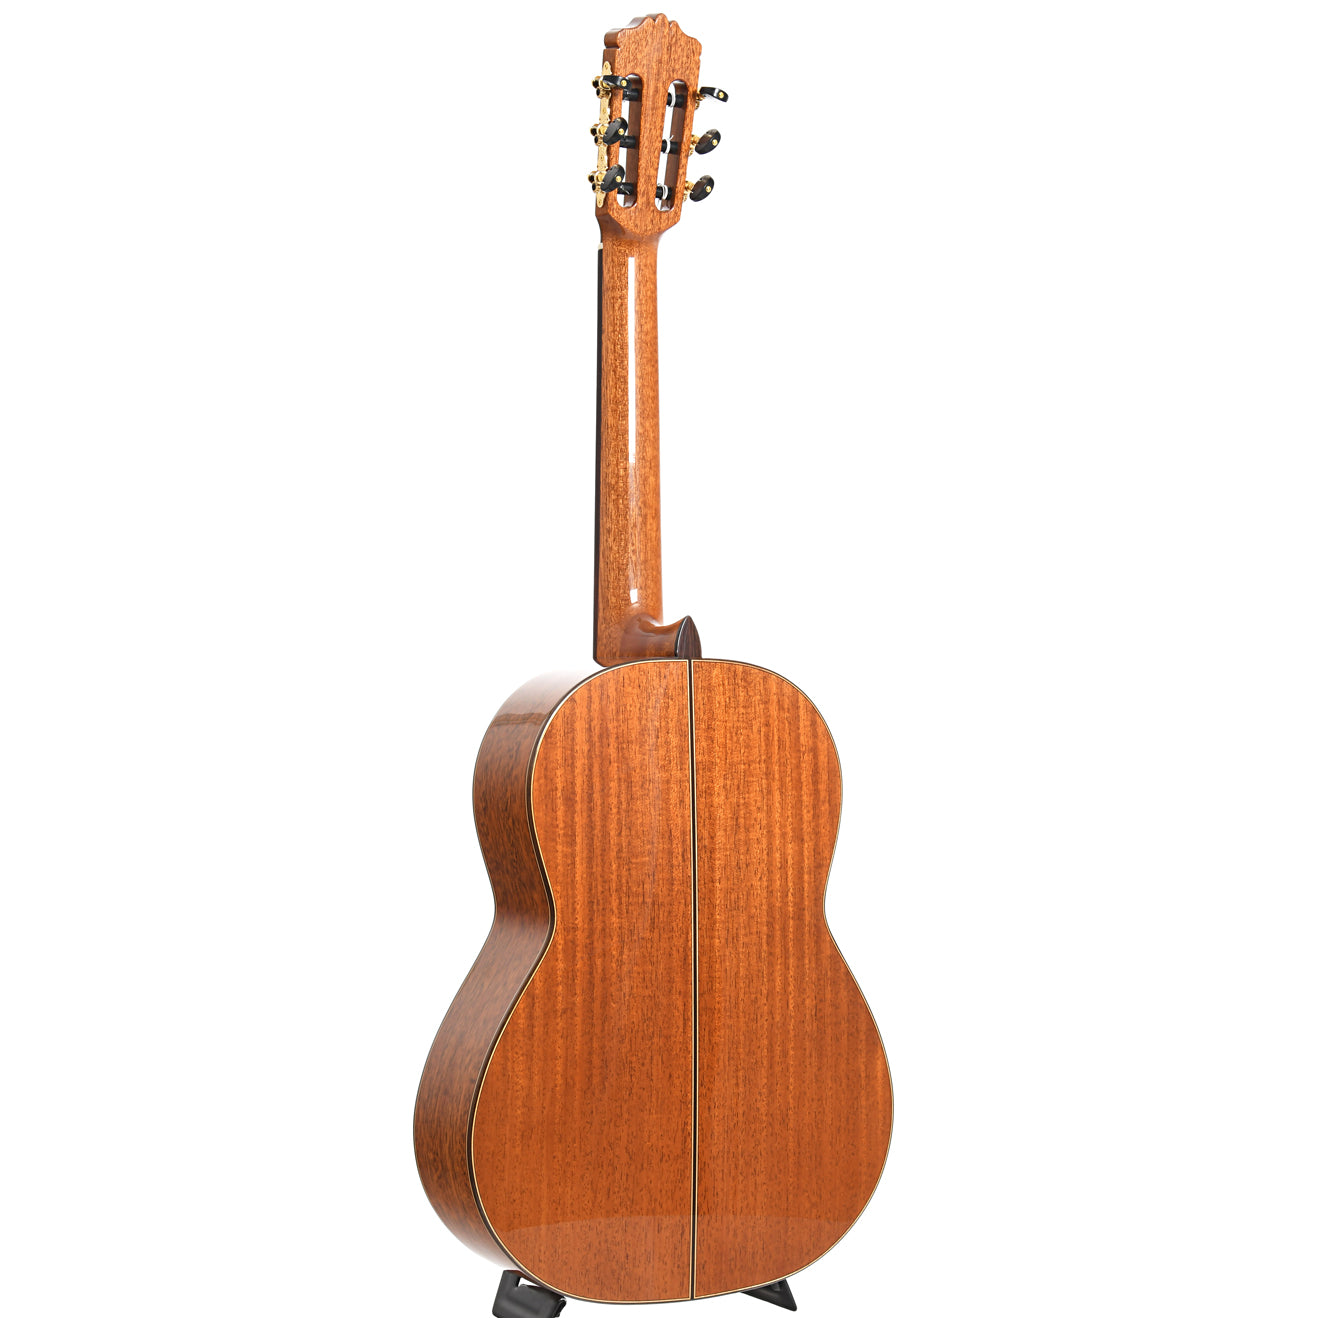 Image 12 of Cordoba C9 Parlor Classical Guitar and Case - SKU# CORC9D : Product Type Classical & Flamenco Guitars : Elderly Instruments